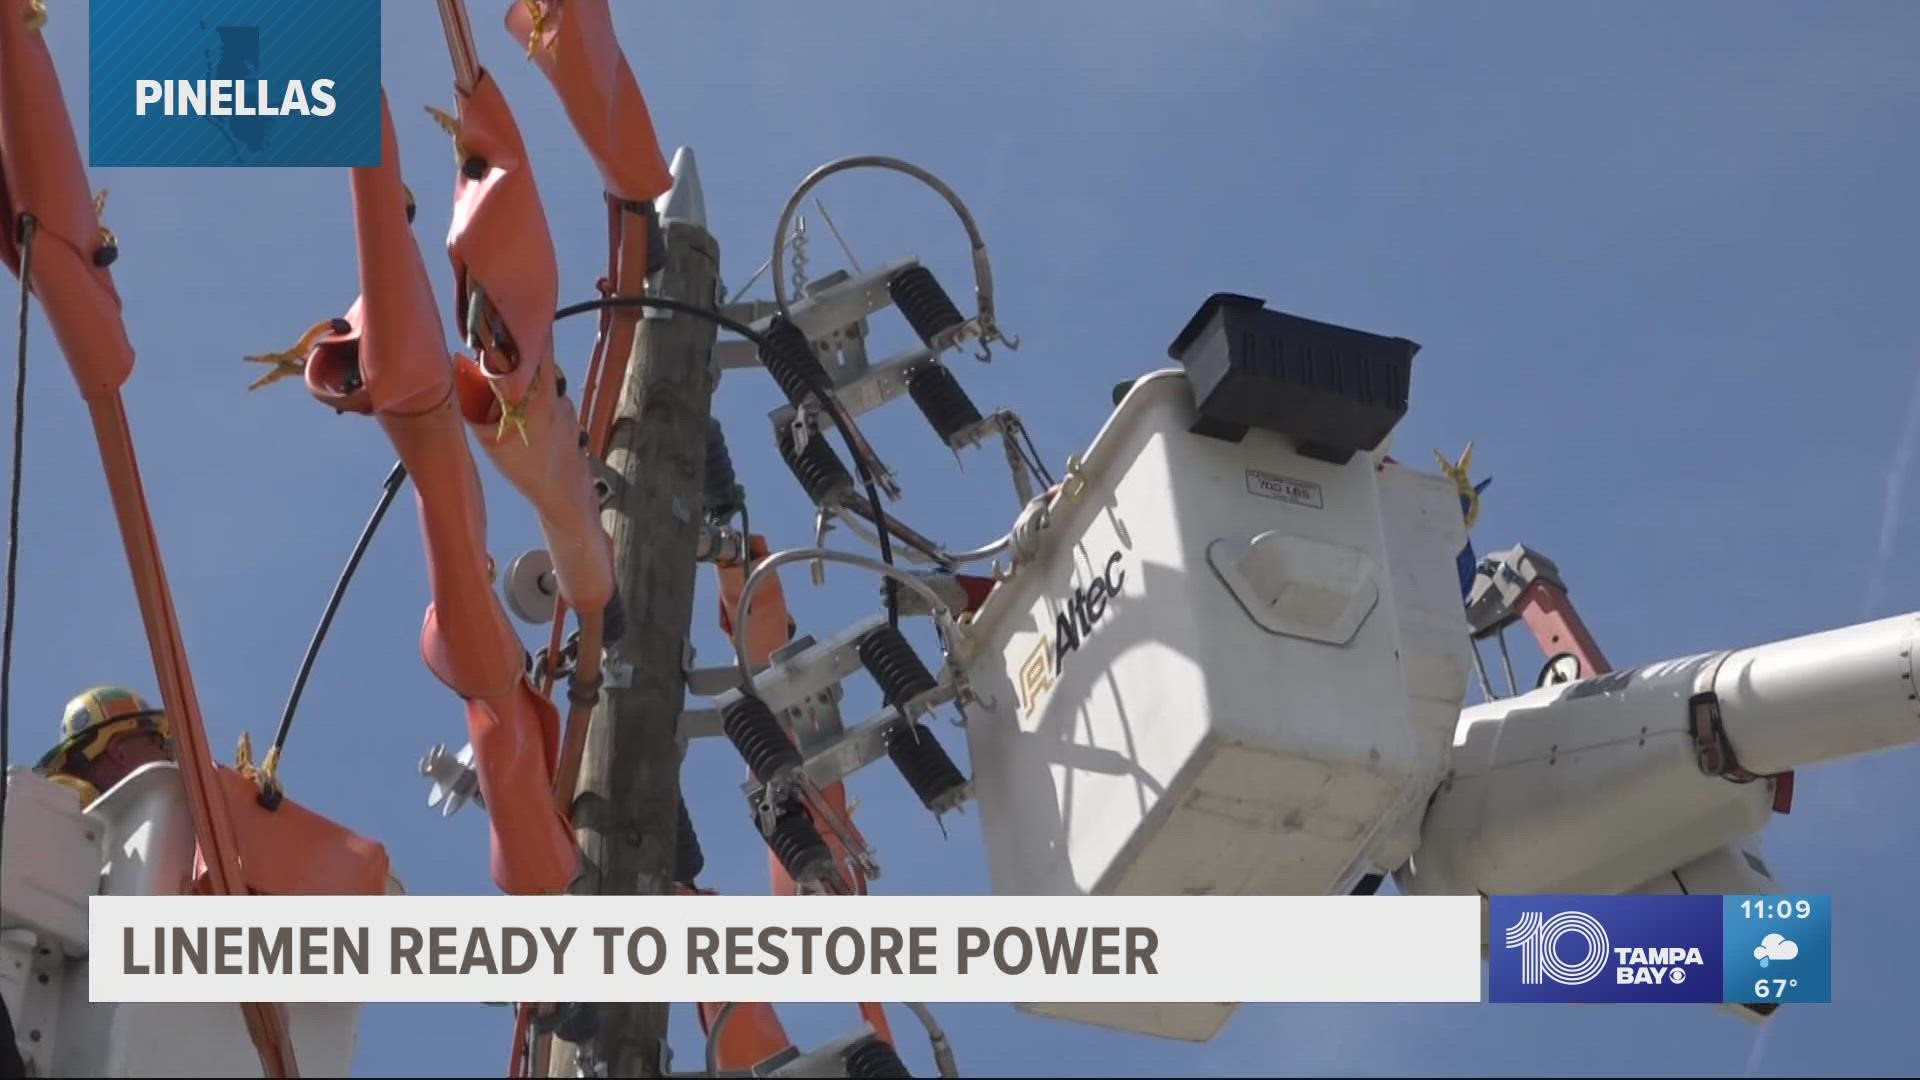 Duke Energy is ready to restore power wherever needed in the Tampa Bay area once the storm passes.